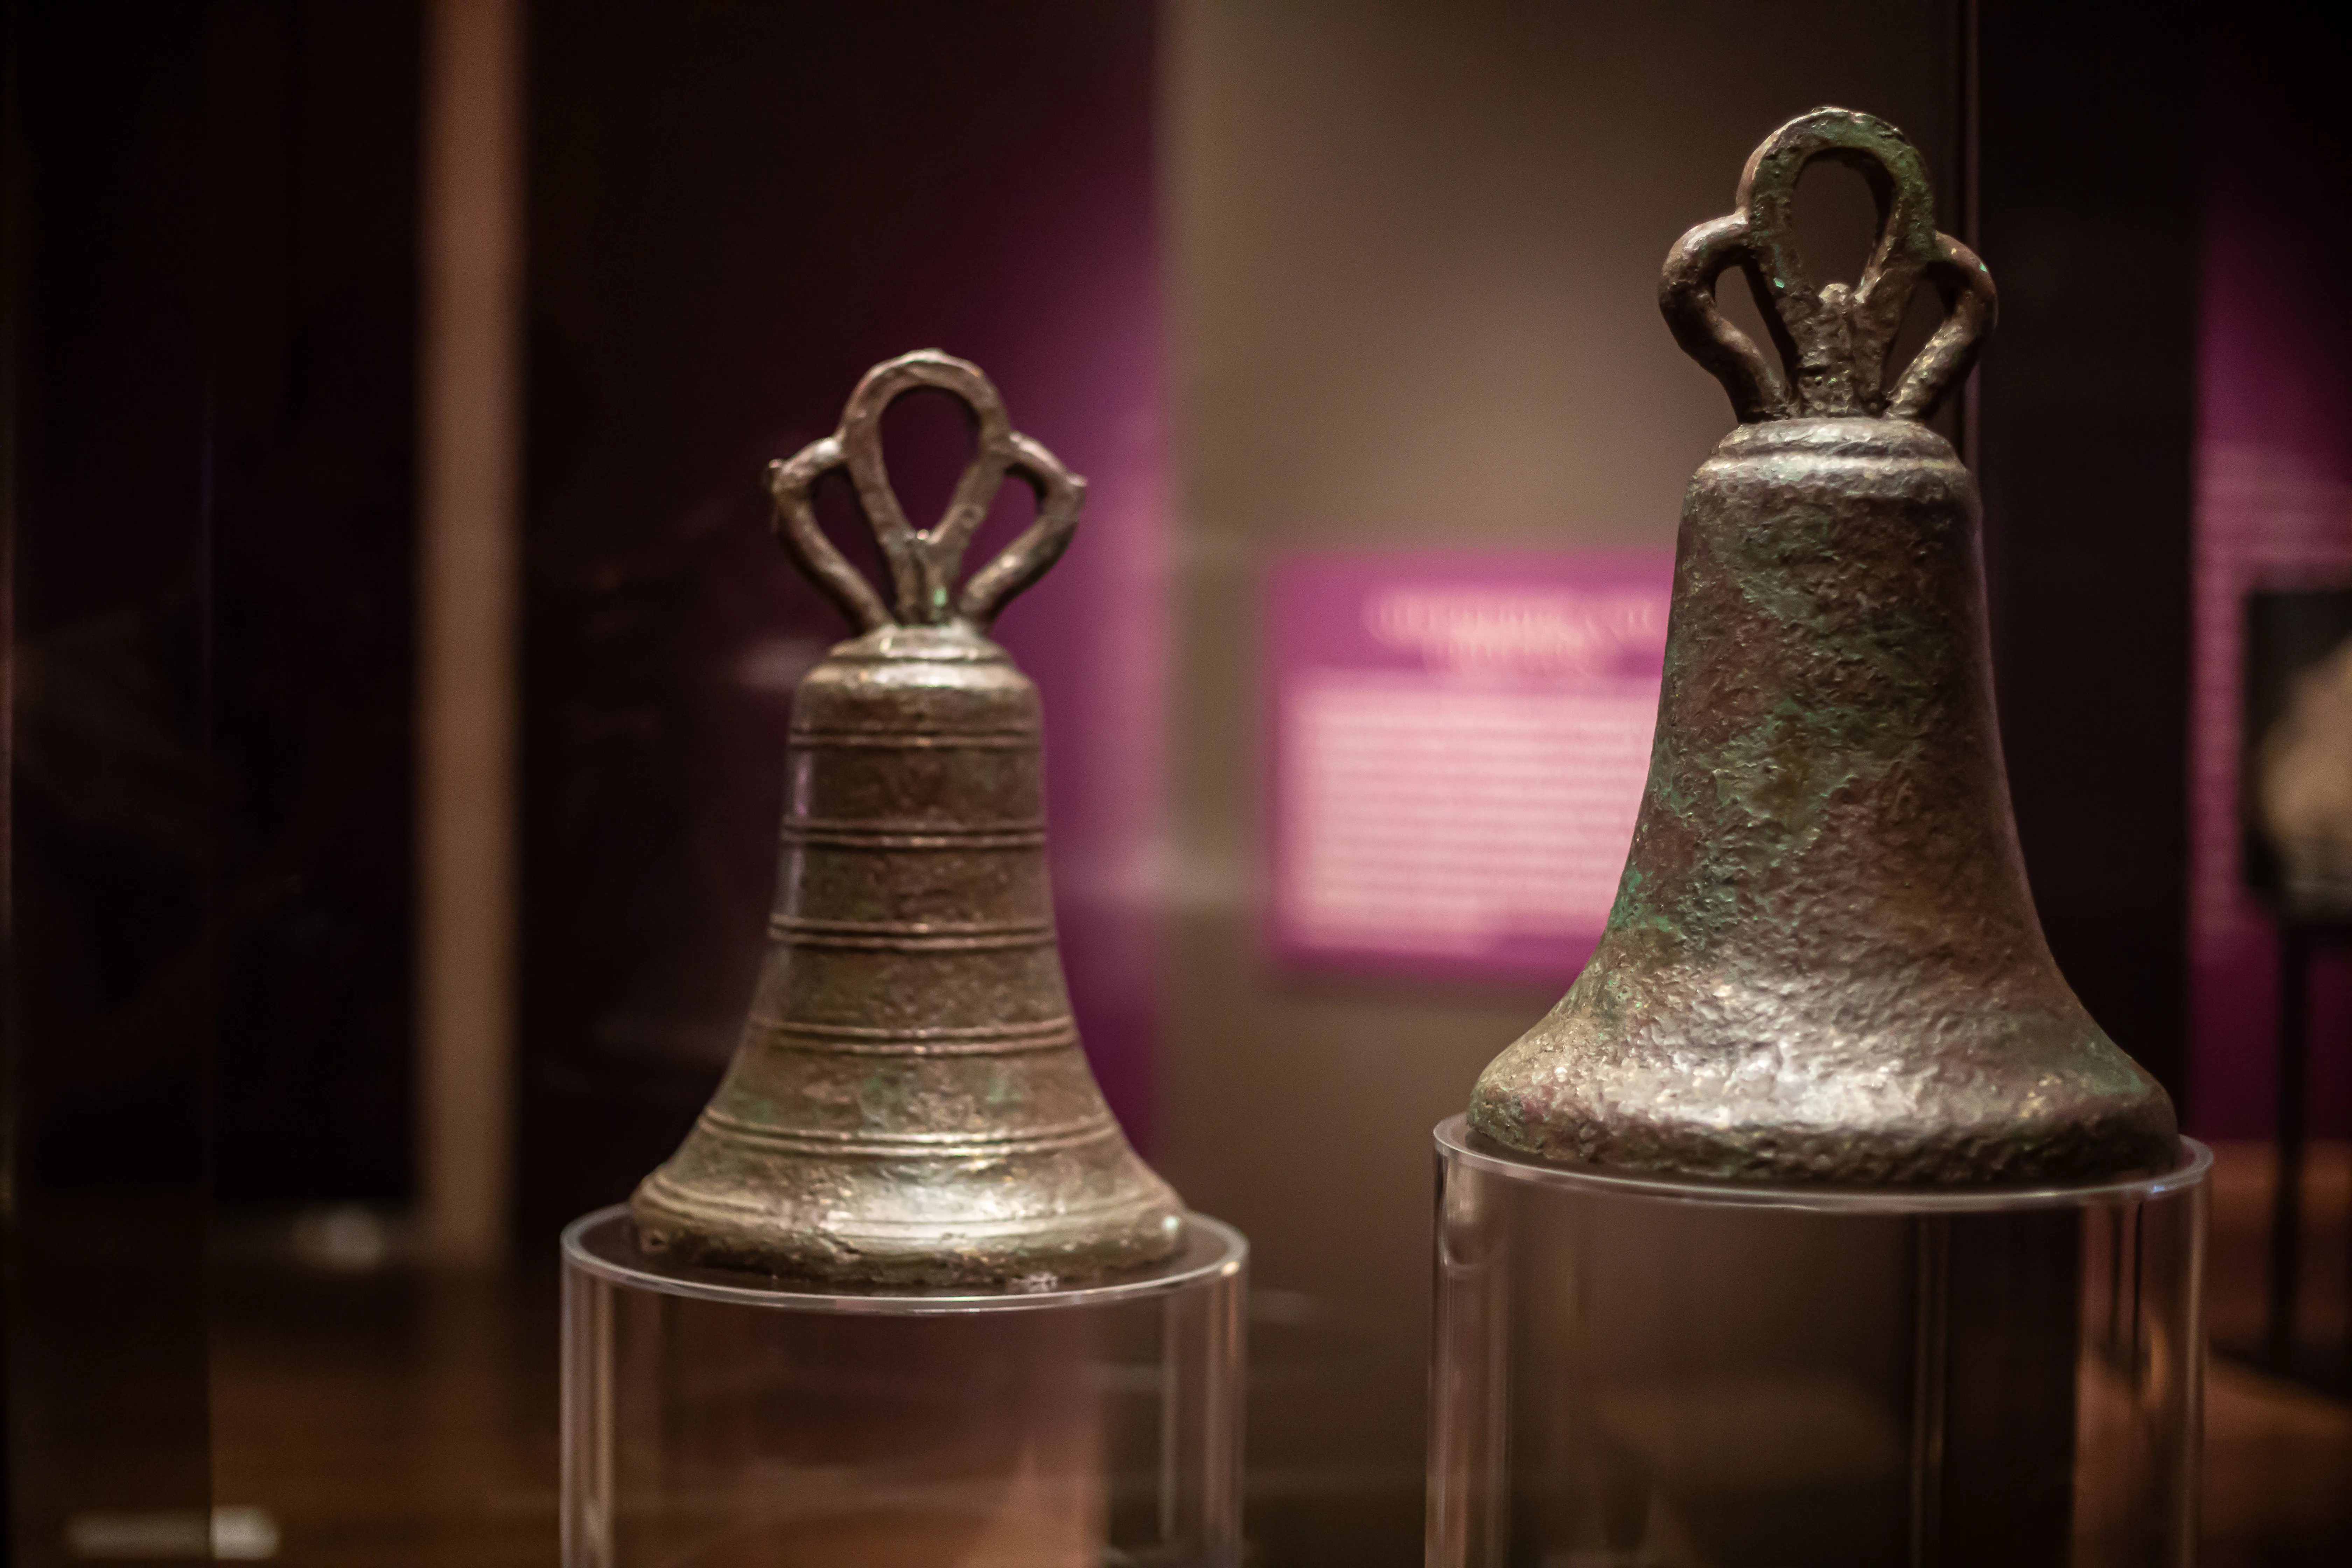 At the Church of the Nativity, the bells were part of a 12-piece carillon, an organ-like instrument that plays bells instead of pipes. The carillon was played during the divine liturgy. Museum of the Bible